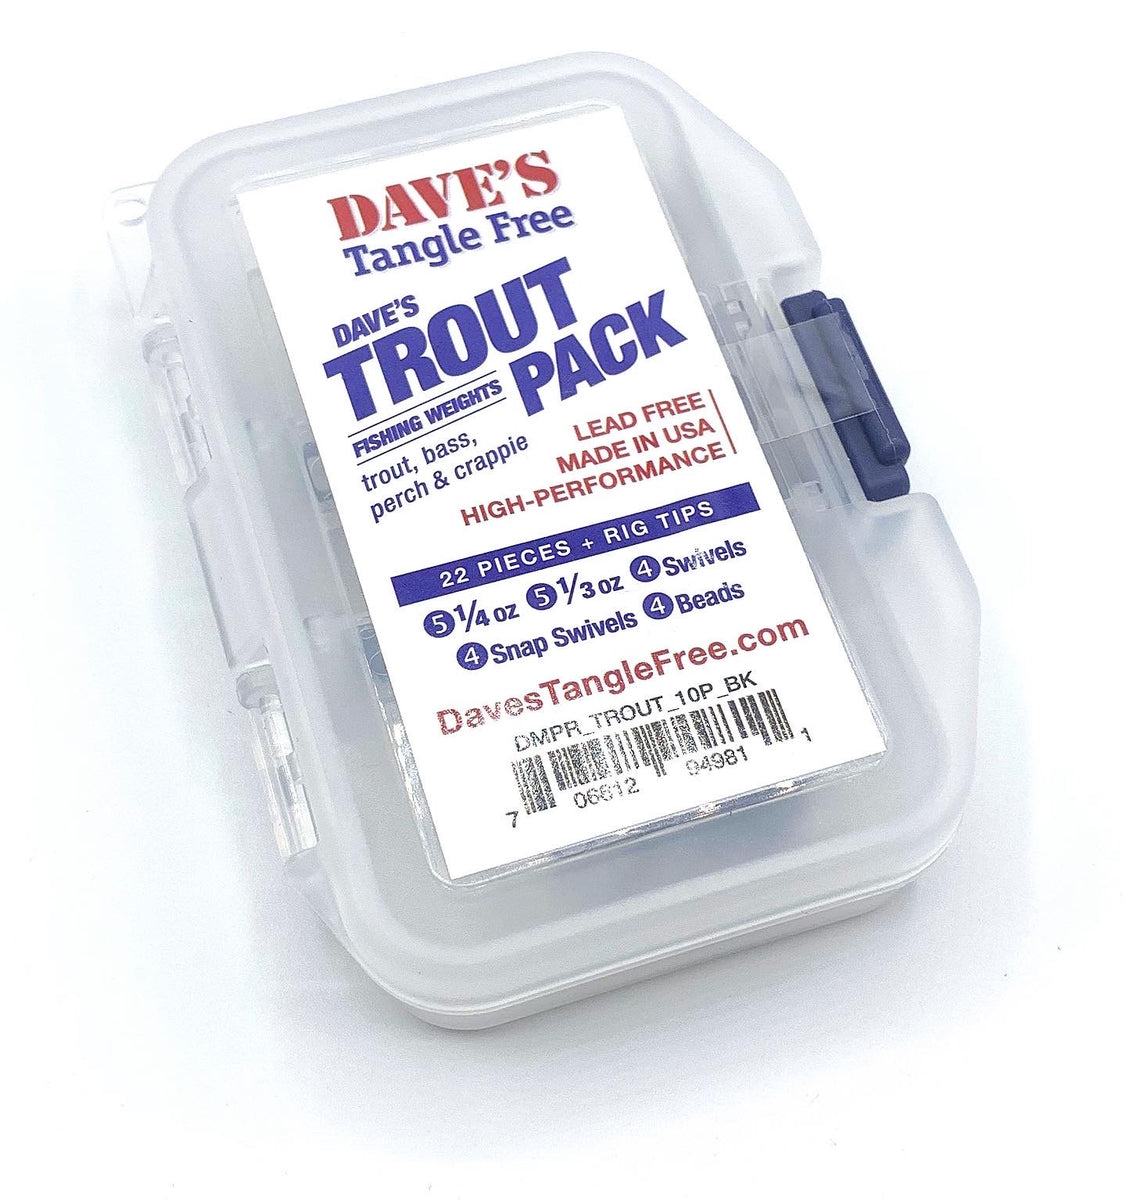 Dave's Tangle Free Trout Pack